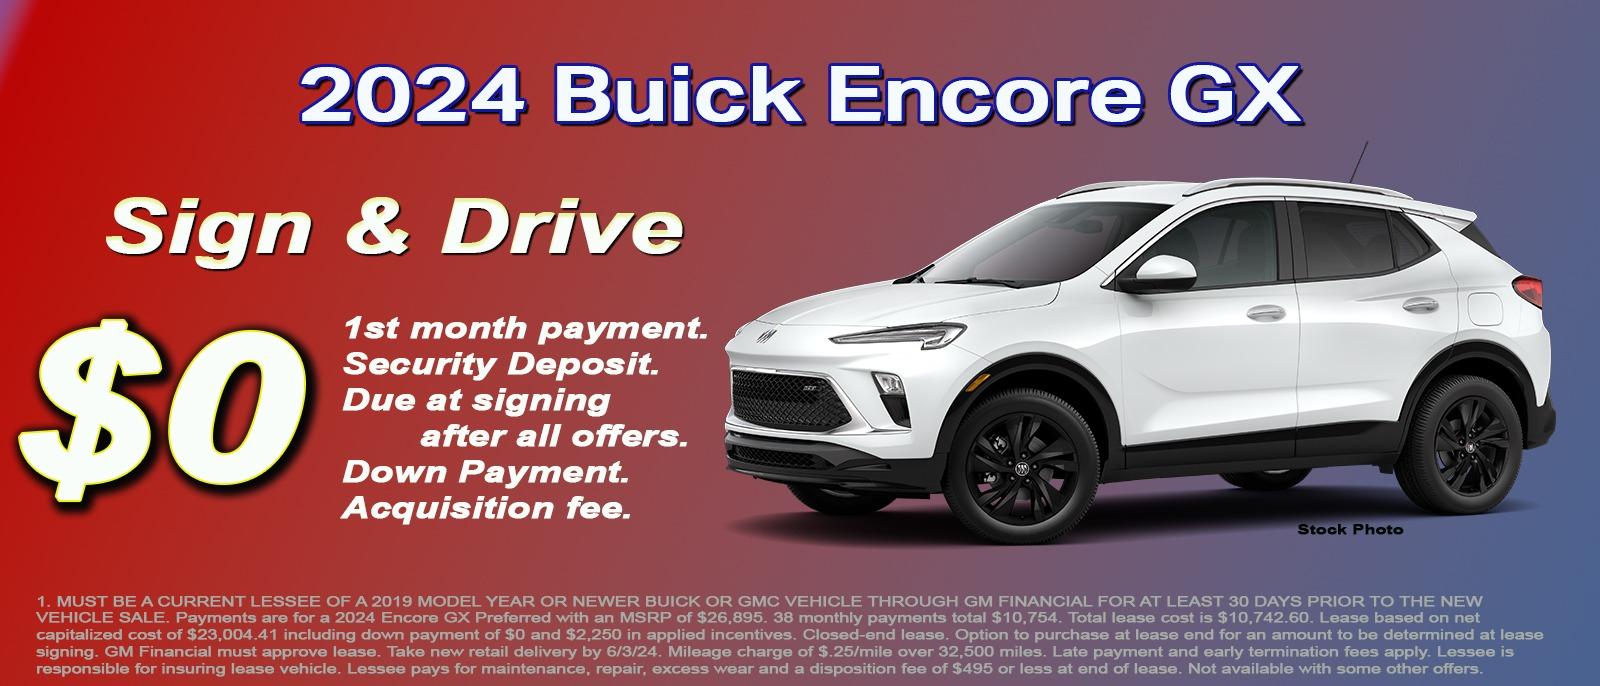 $0 due at signing on your new Buick Encore GX